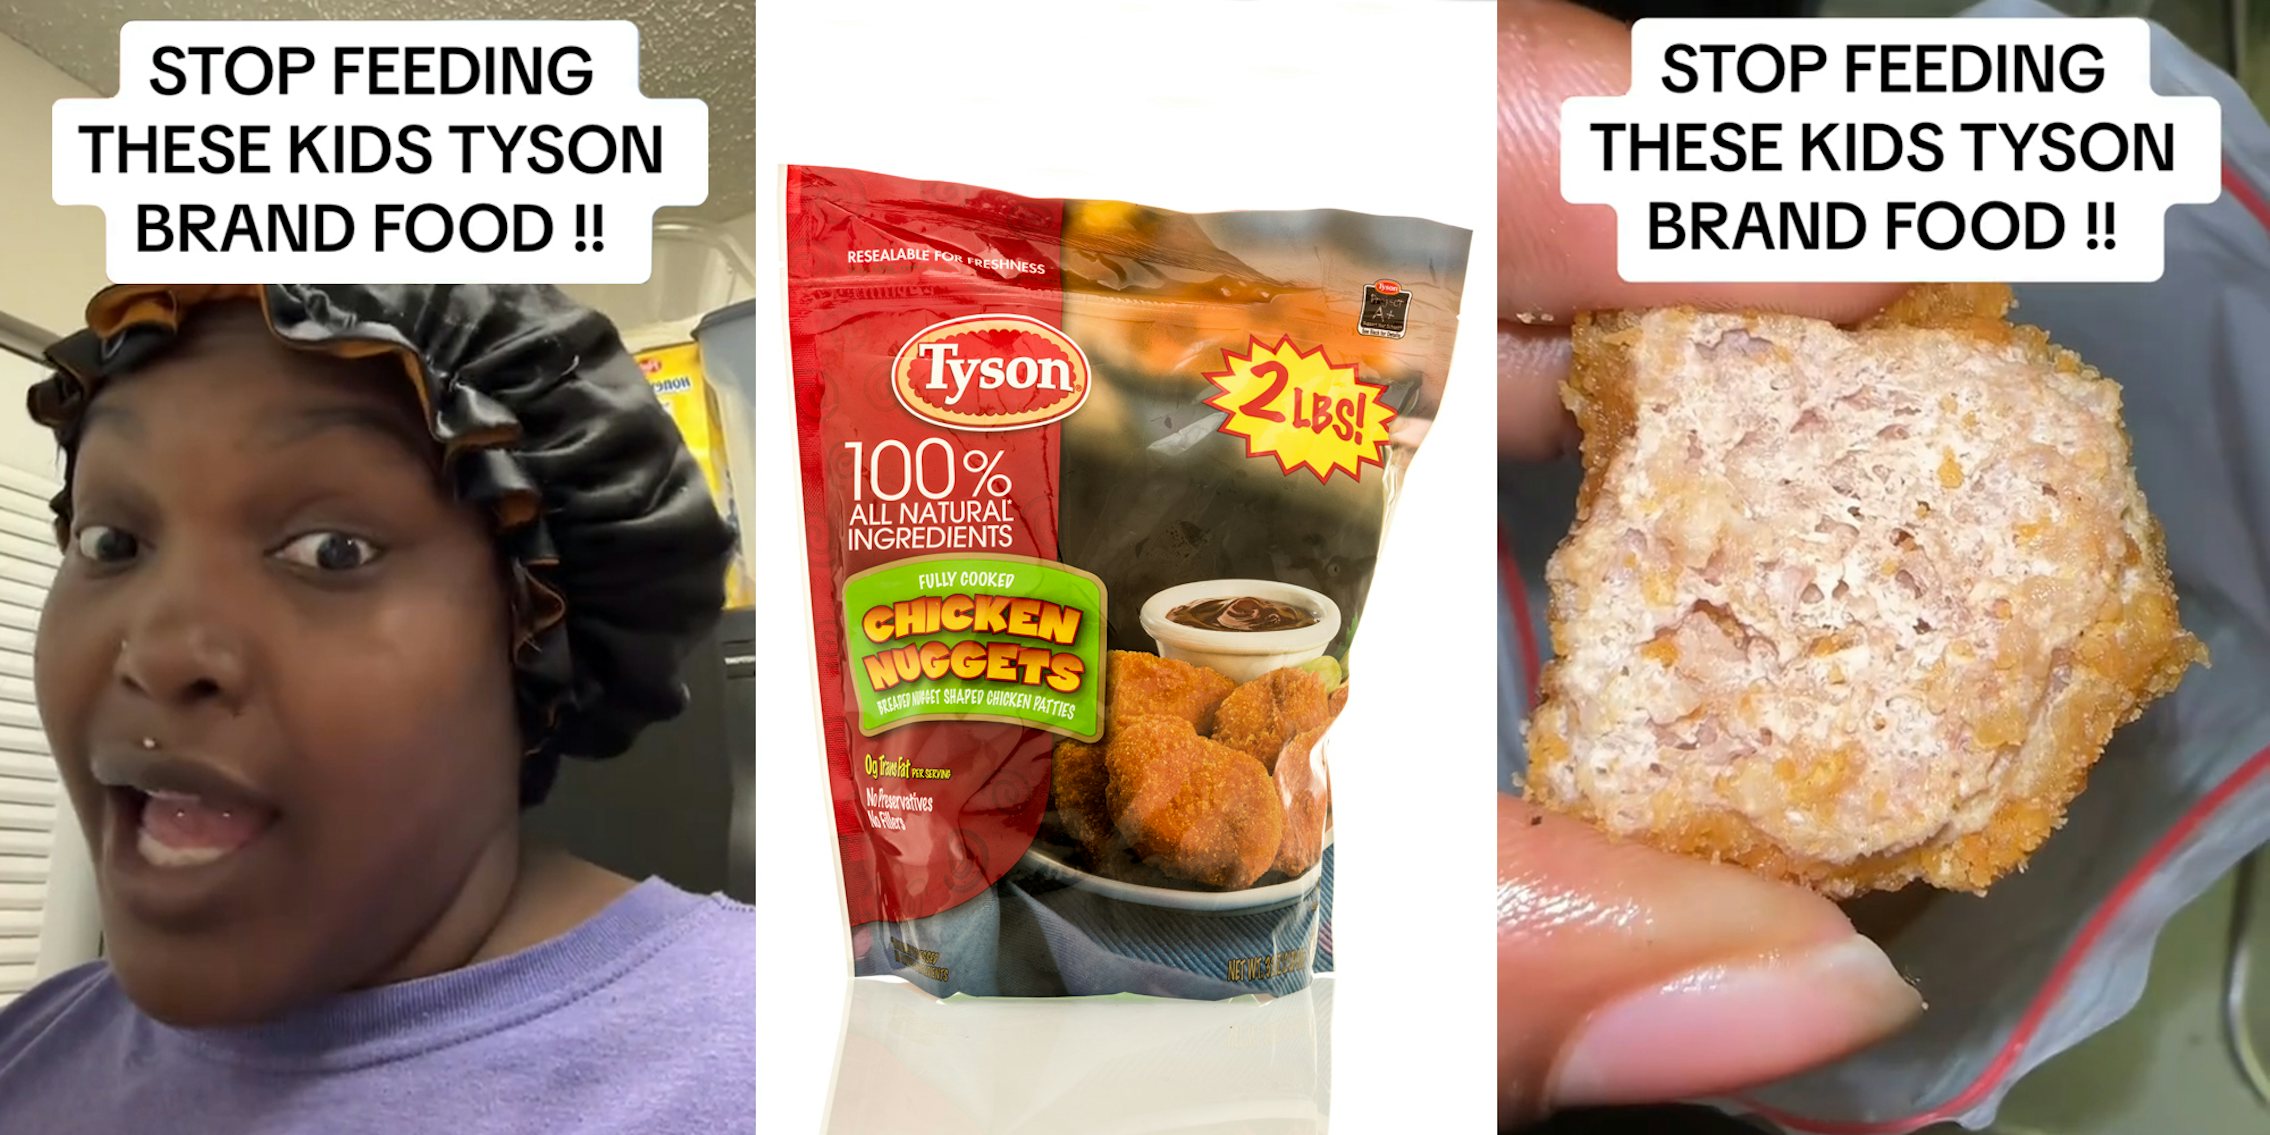 Tyson customer speaking with caption 'STOP FEEDING THESE KIDS TYSON BRAND FOOD!!' (l) Tyson chicken nuggets in front of white background (c) fingers holding chicken nugget with caption 'STOP FEEDING THESE KIDS TYSON BRAND FOOD!!' (r)